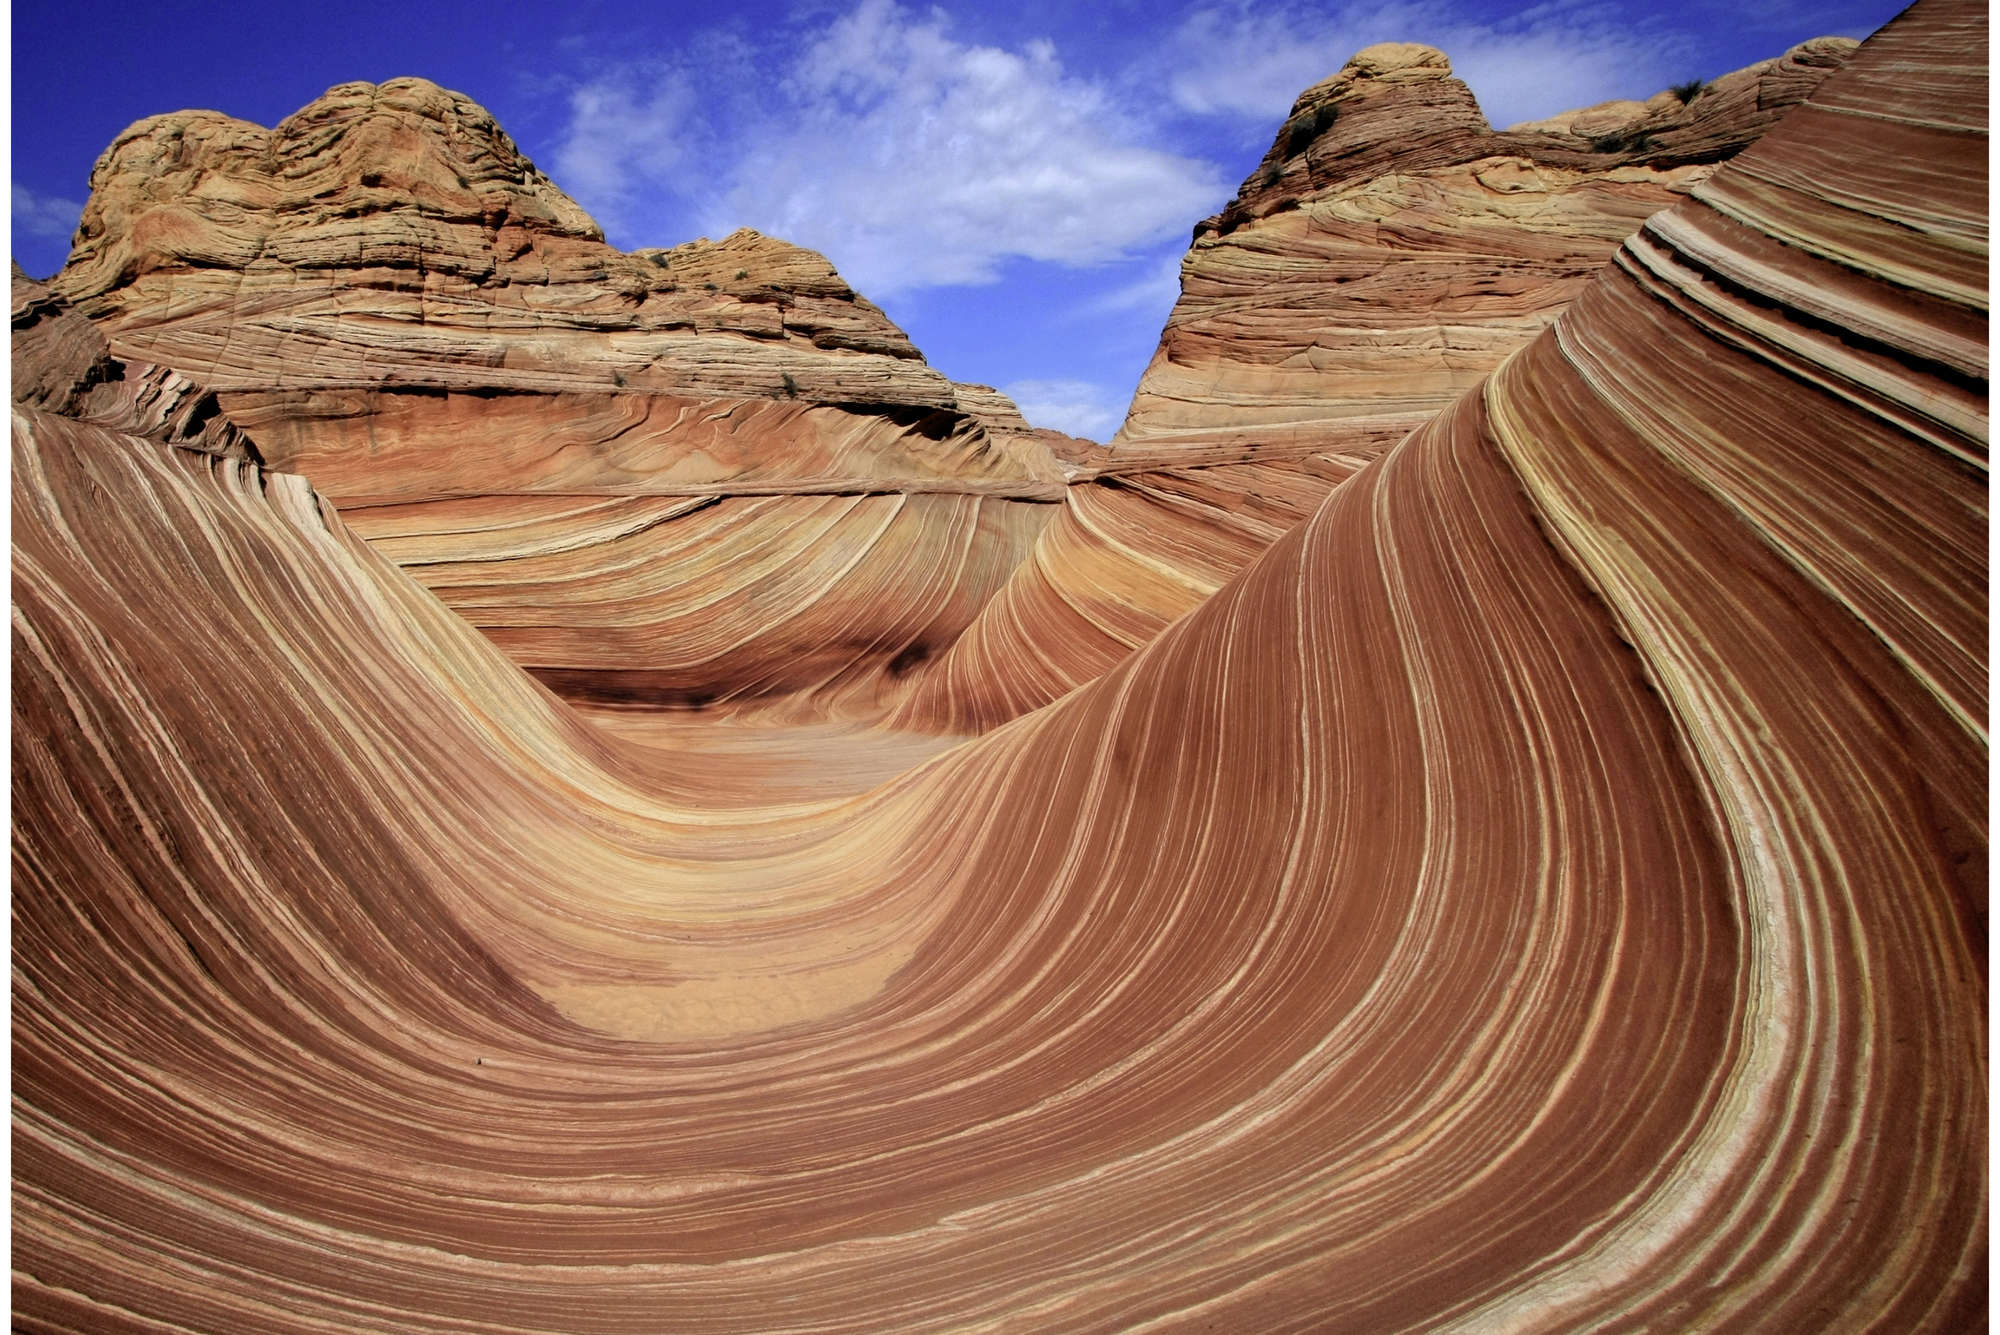             Photo wallpaper Coyote Buttes Mountain Landscape in USA - Textured non-woven
        